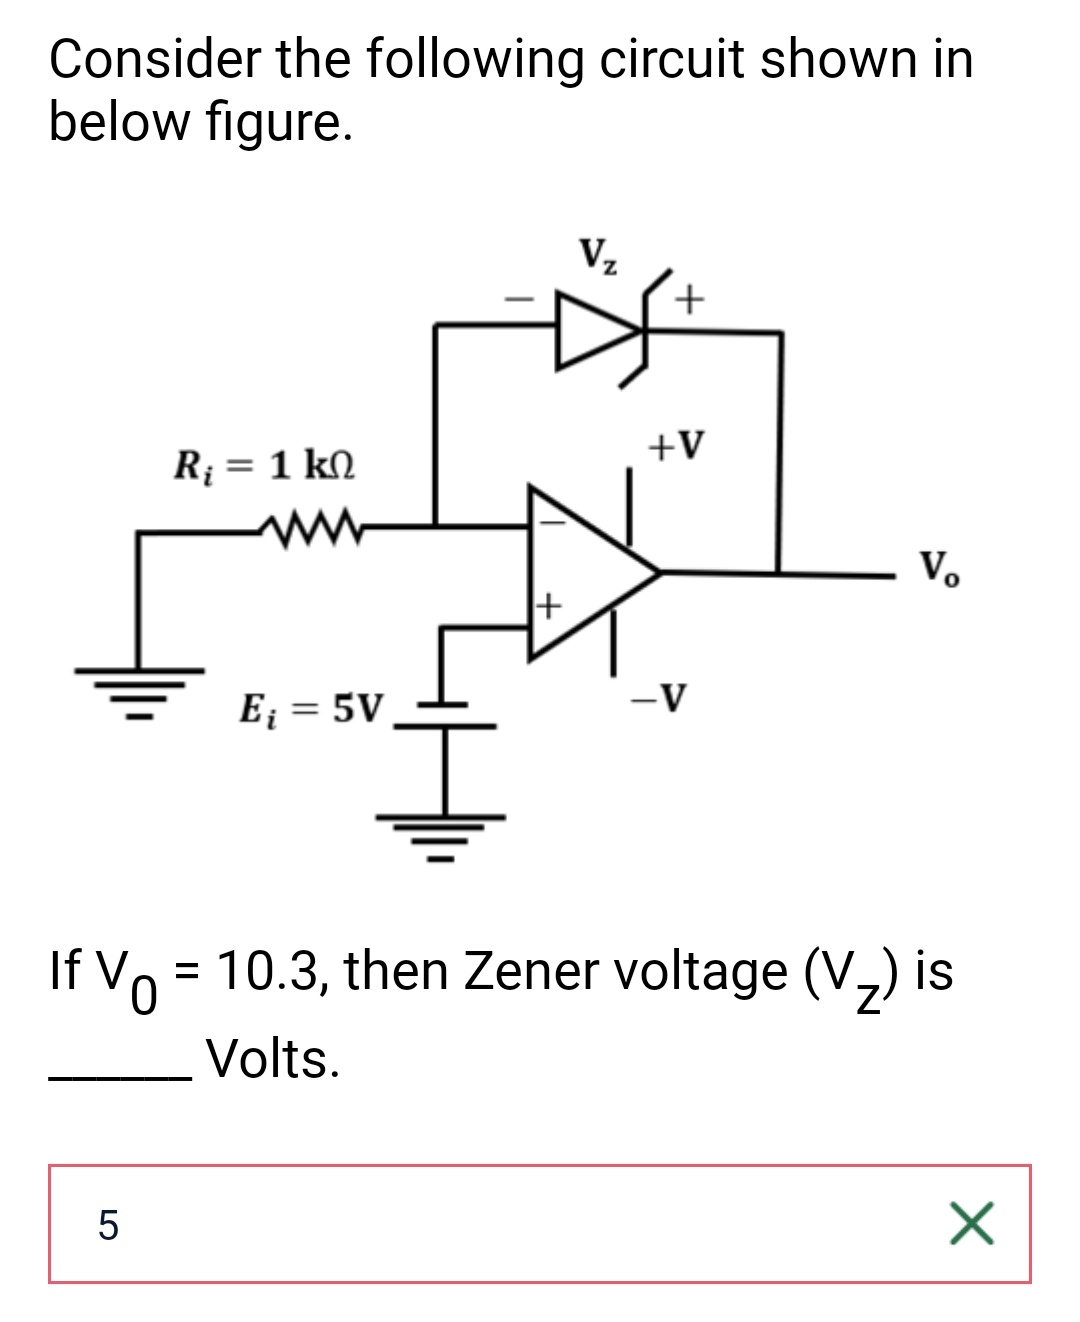 Consider the following circuit shown in
below figure.
R₁ = 1 kn
www
5
E₁ = 5V
+
V₂
+
+V
-V
Vo
If V = 10.3, then Zener voltage (V₂) is
Volts.
X